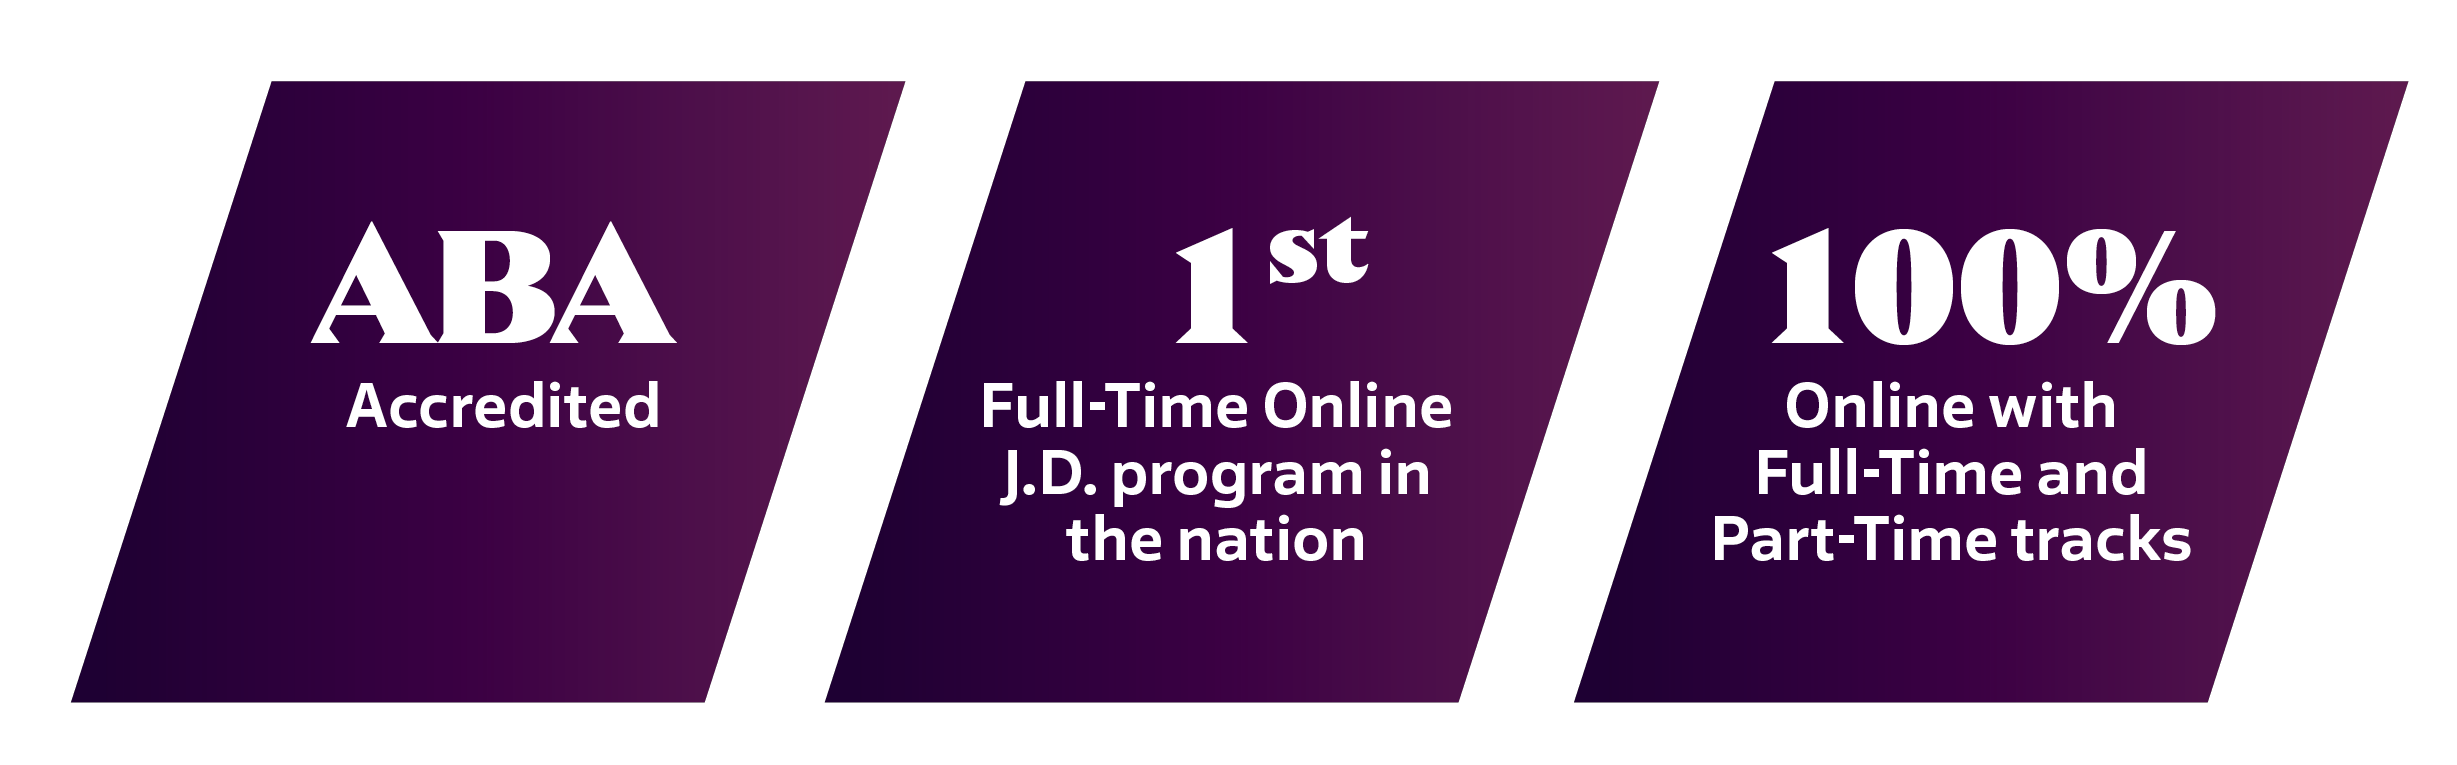 Online J.D. infographic: ABA accredited , 1st Full-Time Online J.D. Program in the Nation, 100% Online with Full-Time and Part-Time tracks 